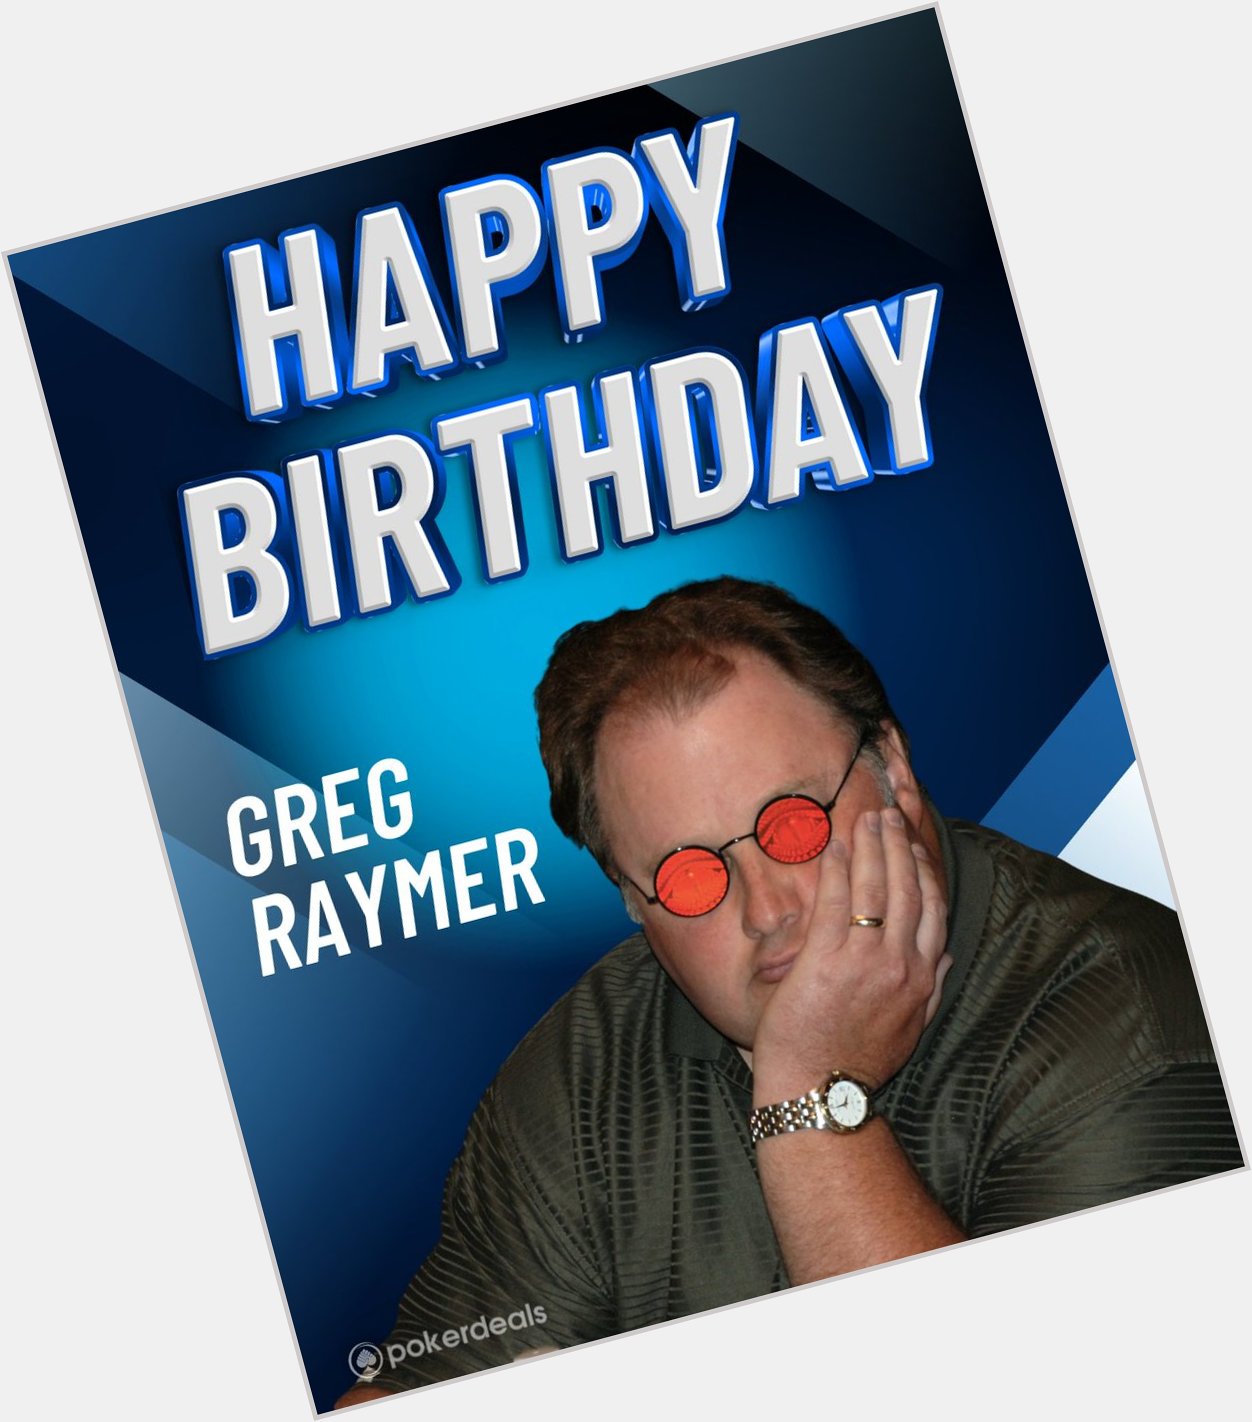 Happy Birthday to Greg Raymer, a.k.a  